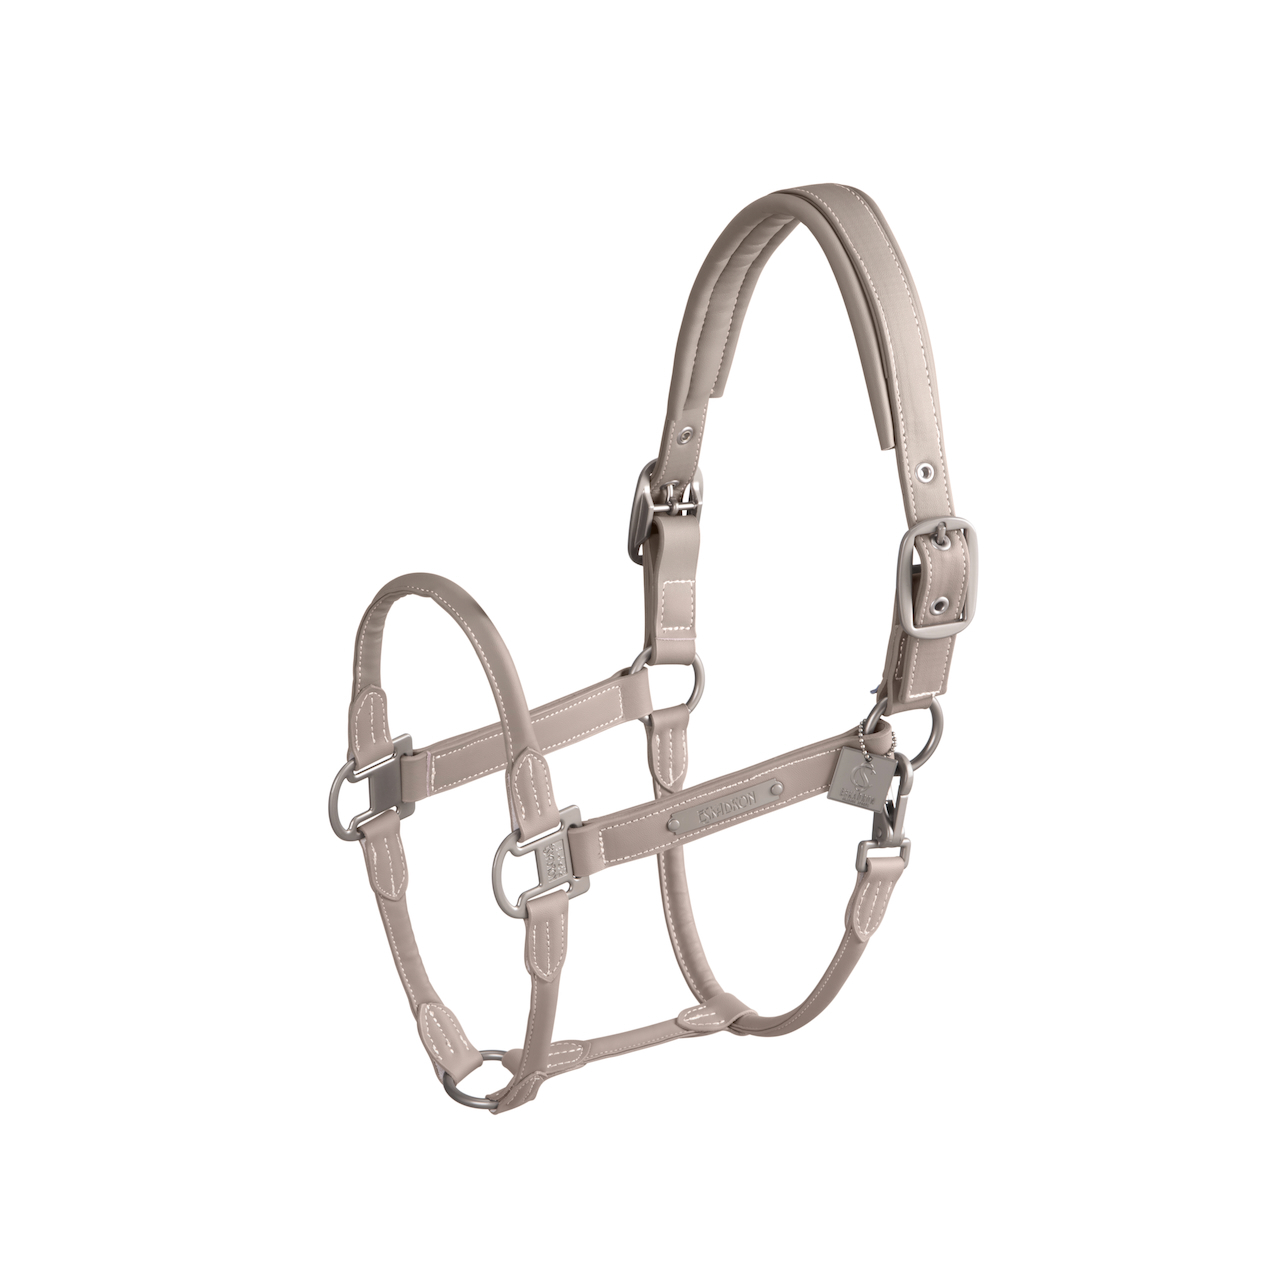 Classics Sports" halter with thorn buckle, brown